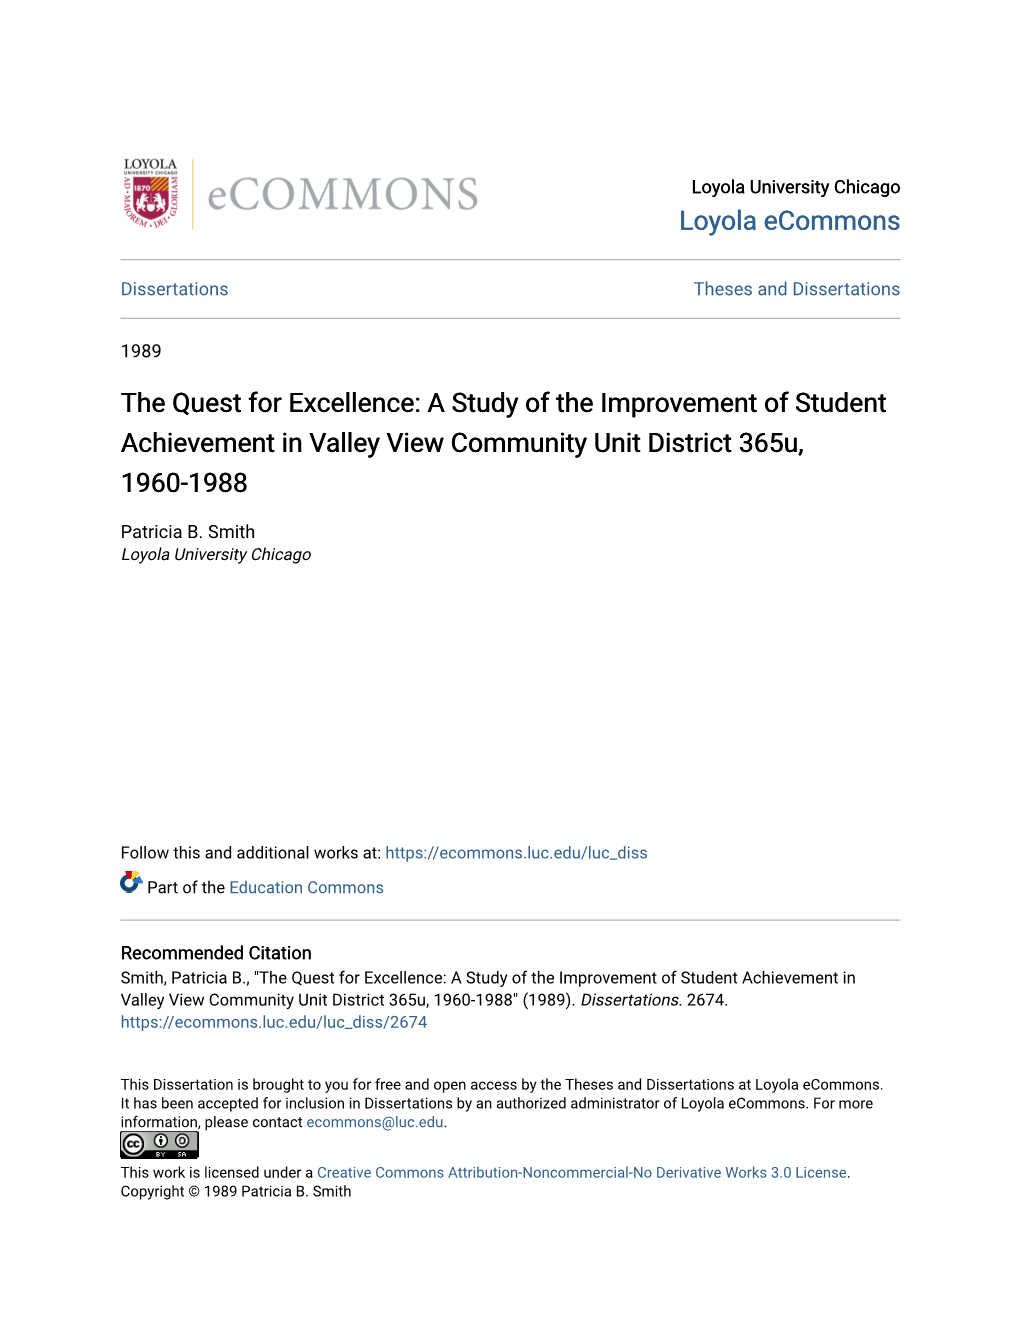 A Study of the Improvement of Student Achievement in Valley View Community Unit District 365U, 1960-1988